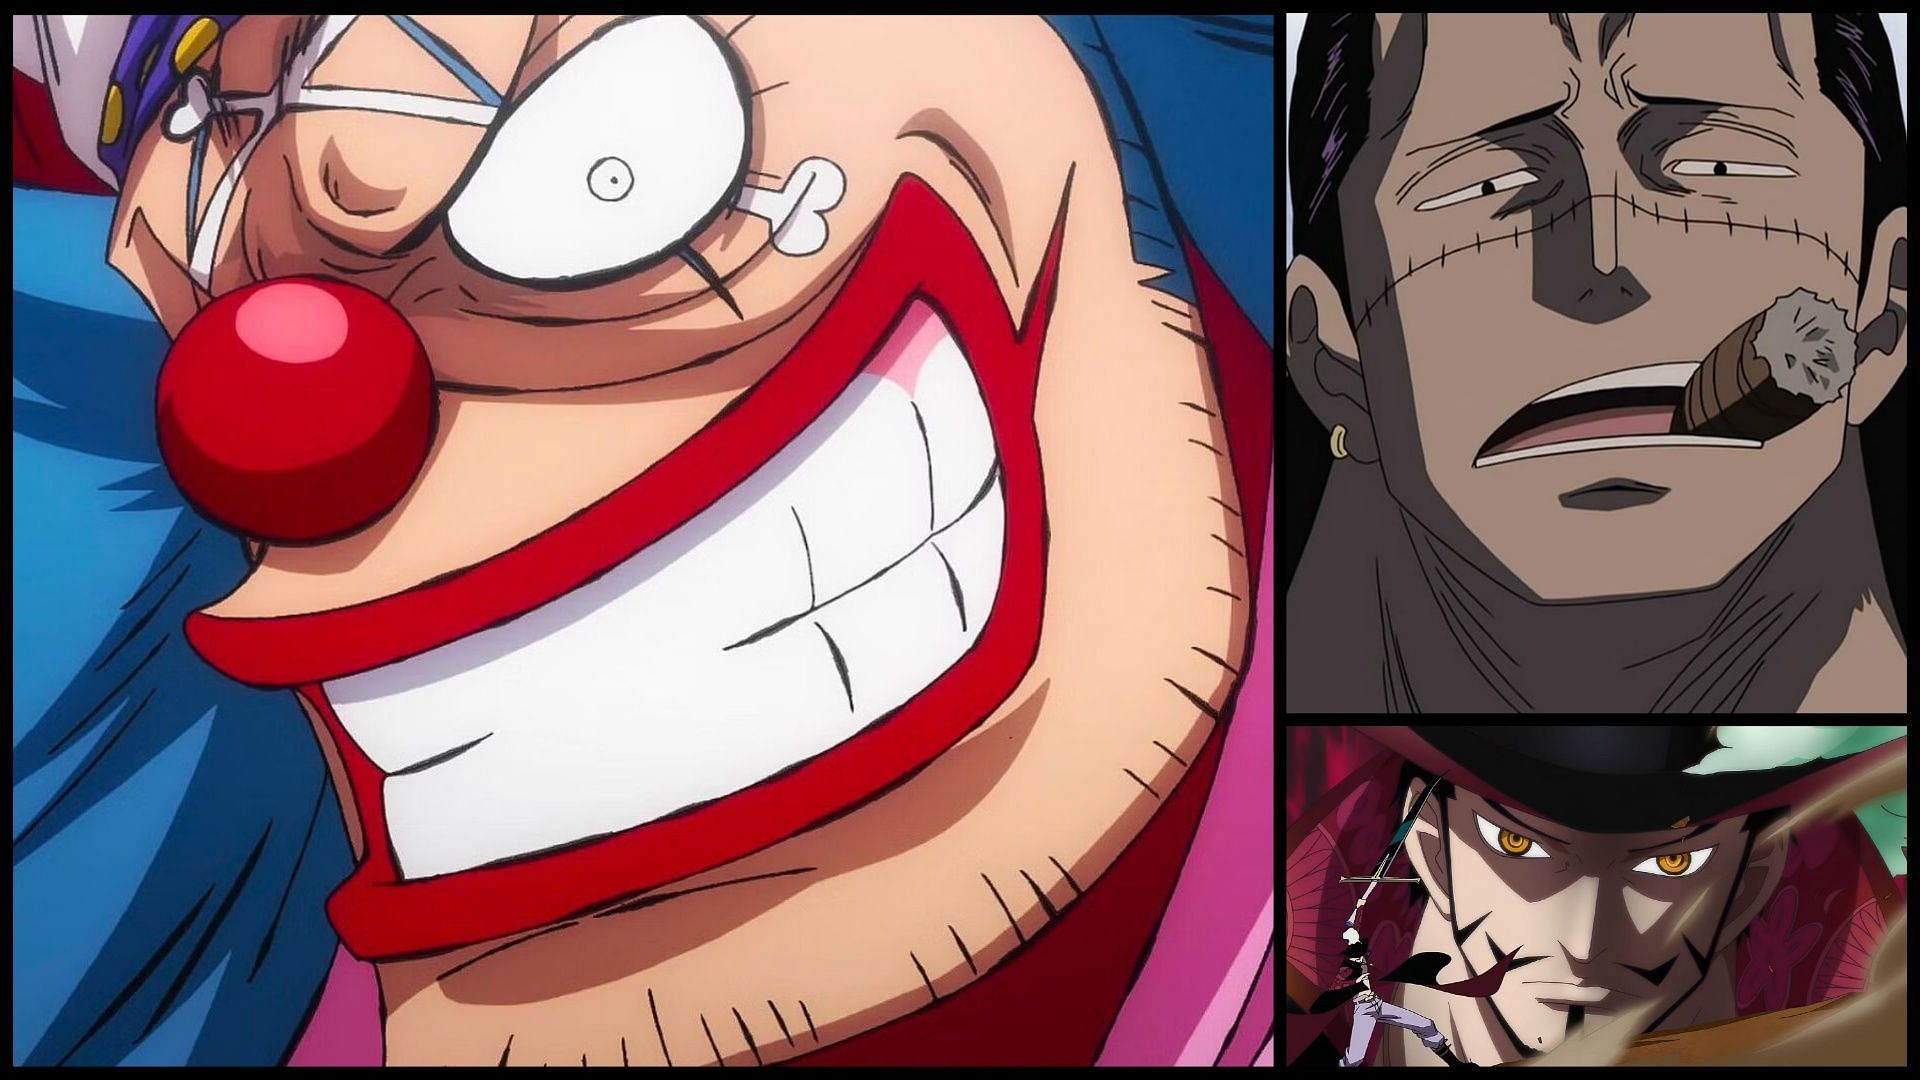 Both the founding and future members of One Piece